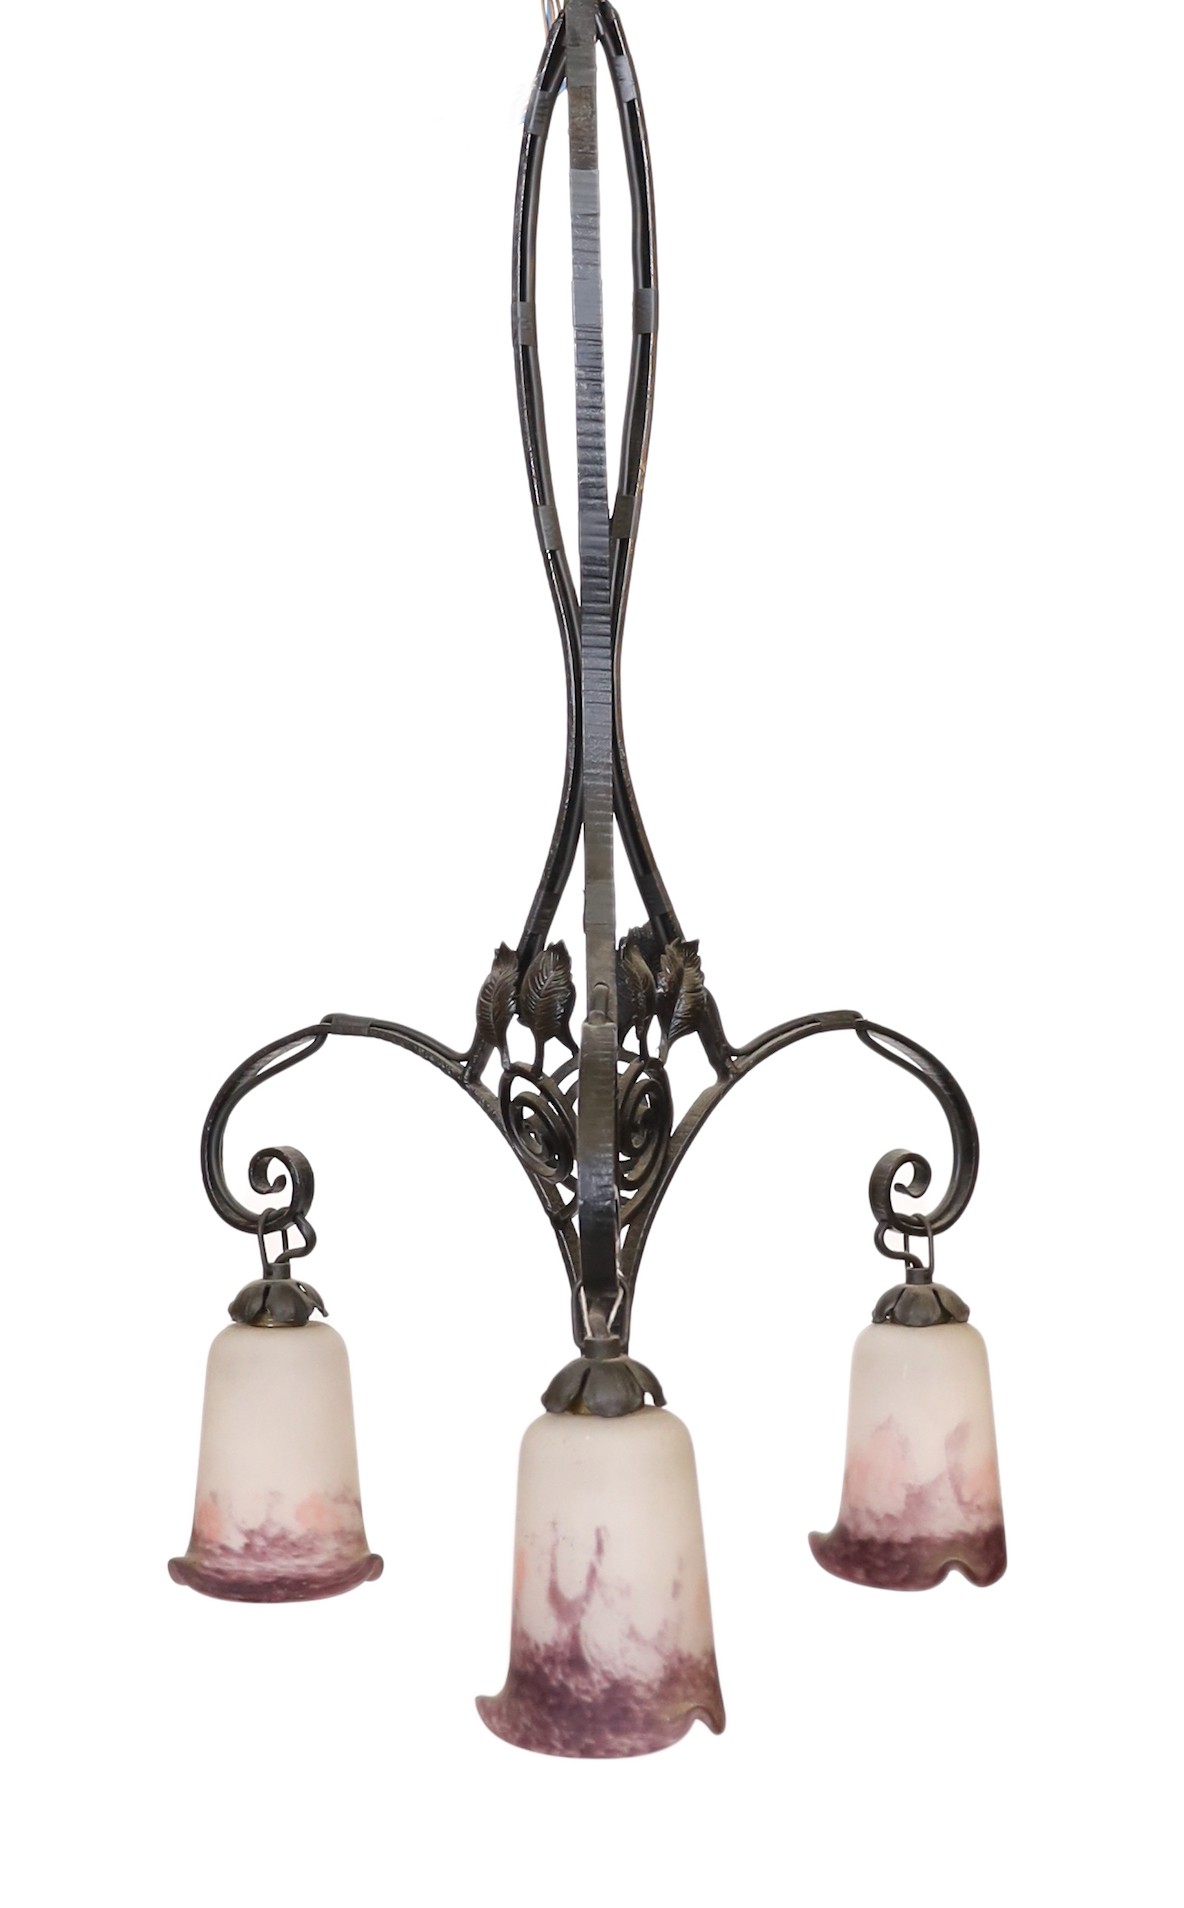 A 1920s French wrought iron three branch light fitting with marbled and frosted glass shades, height 74cm. width 43cm